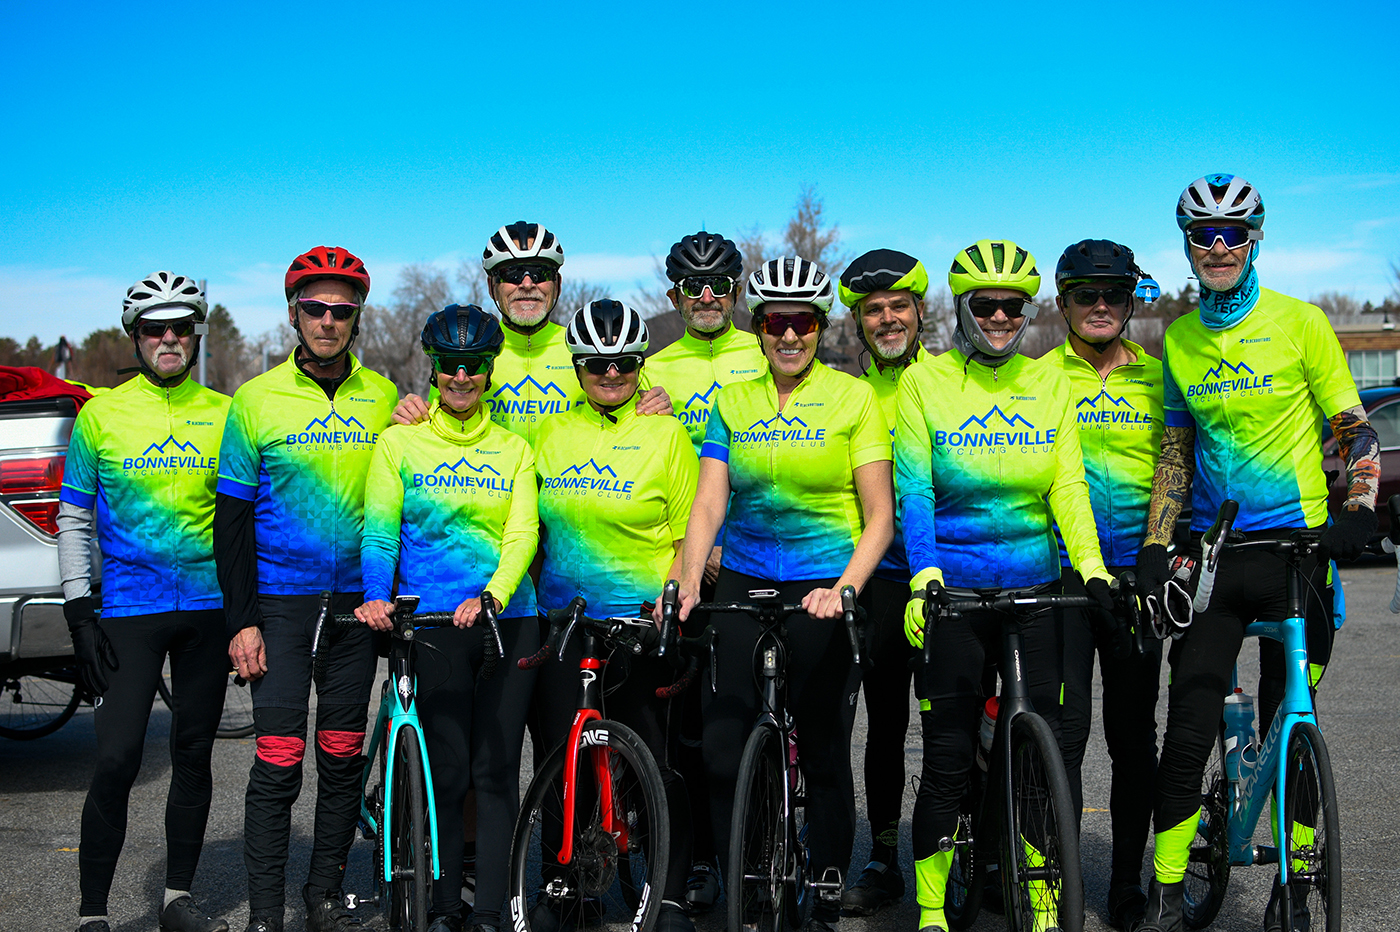 A group of Bonneville Cycling Club members stand in a group photo wearing bright, lime green and blue cycling shirts. Photo: Em Behringer